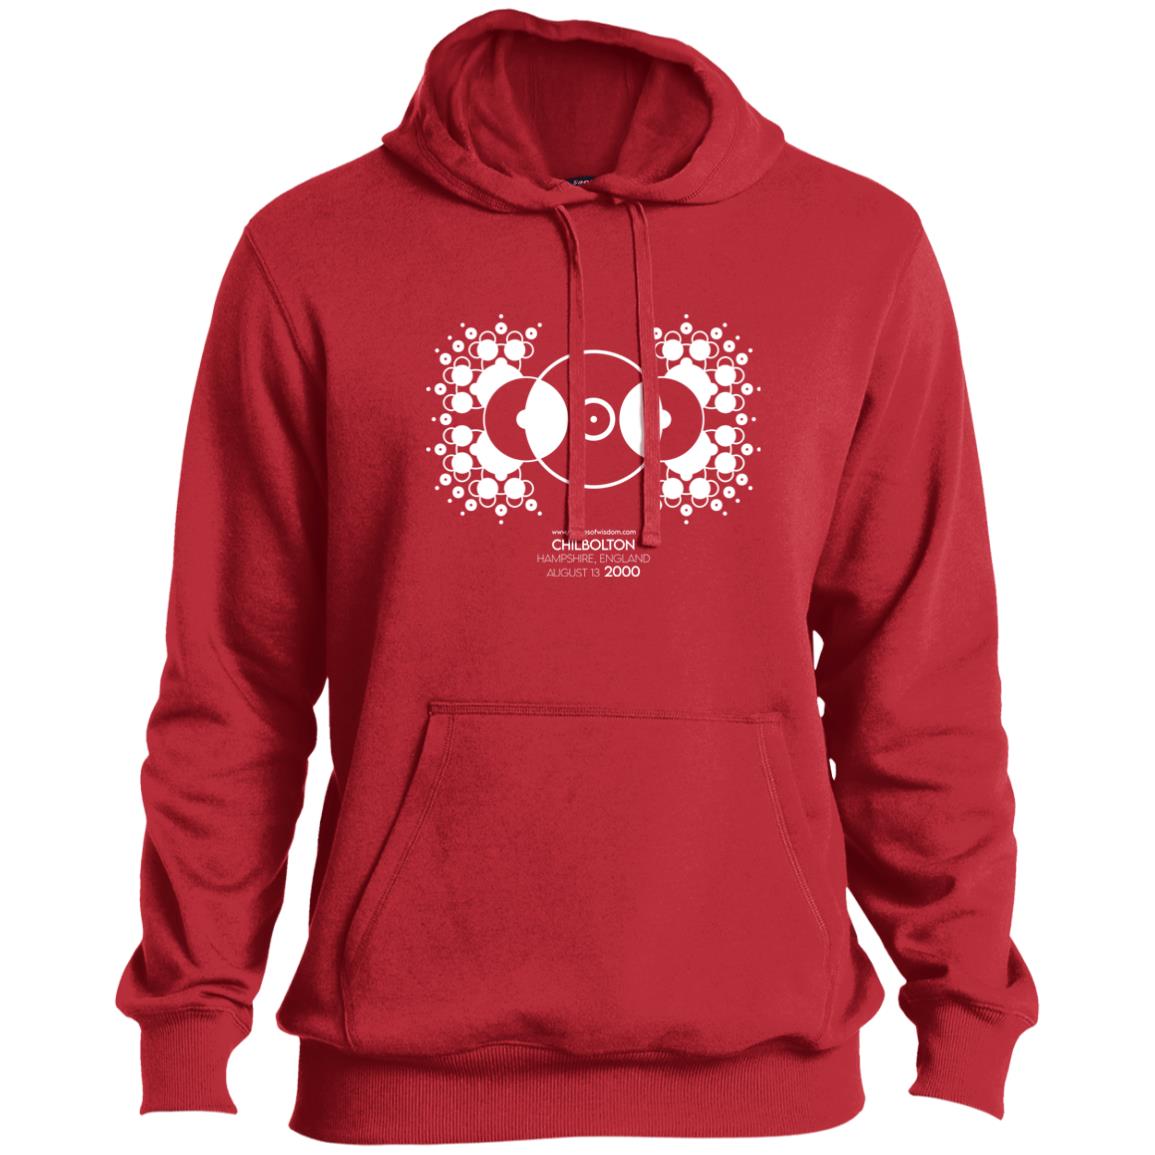 Crop Circle Pullover Hoodie - Chilbolton